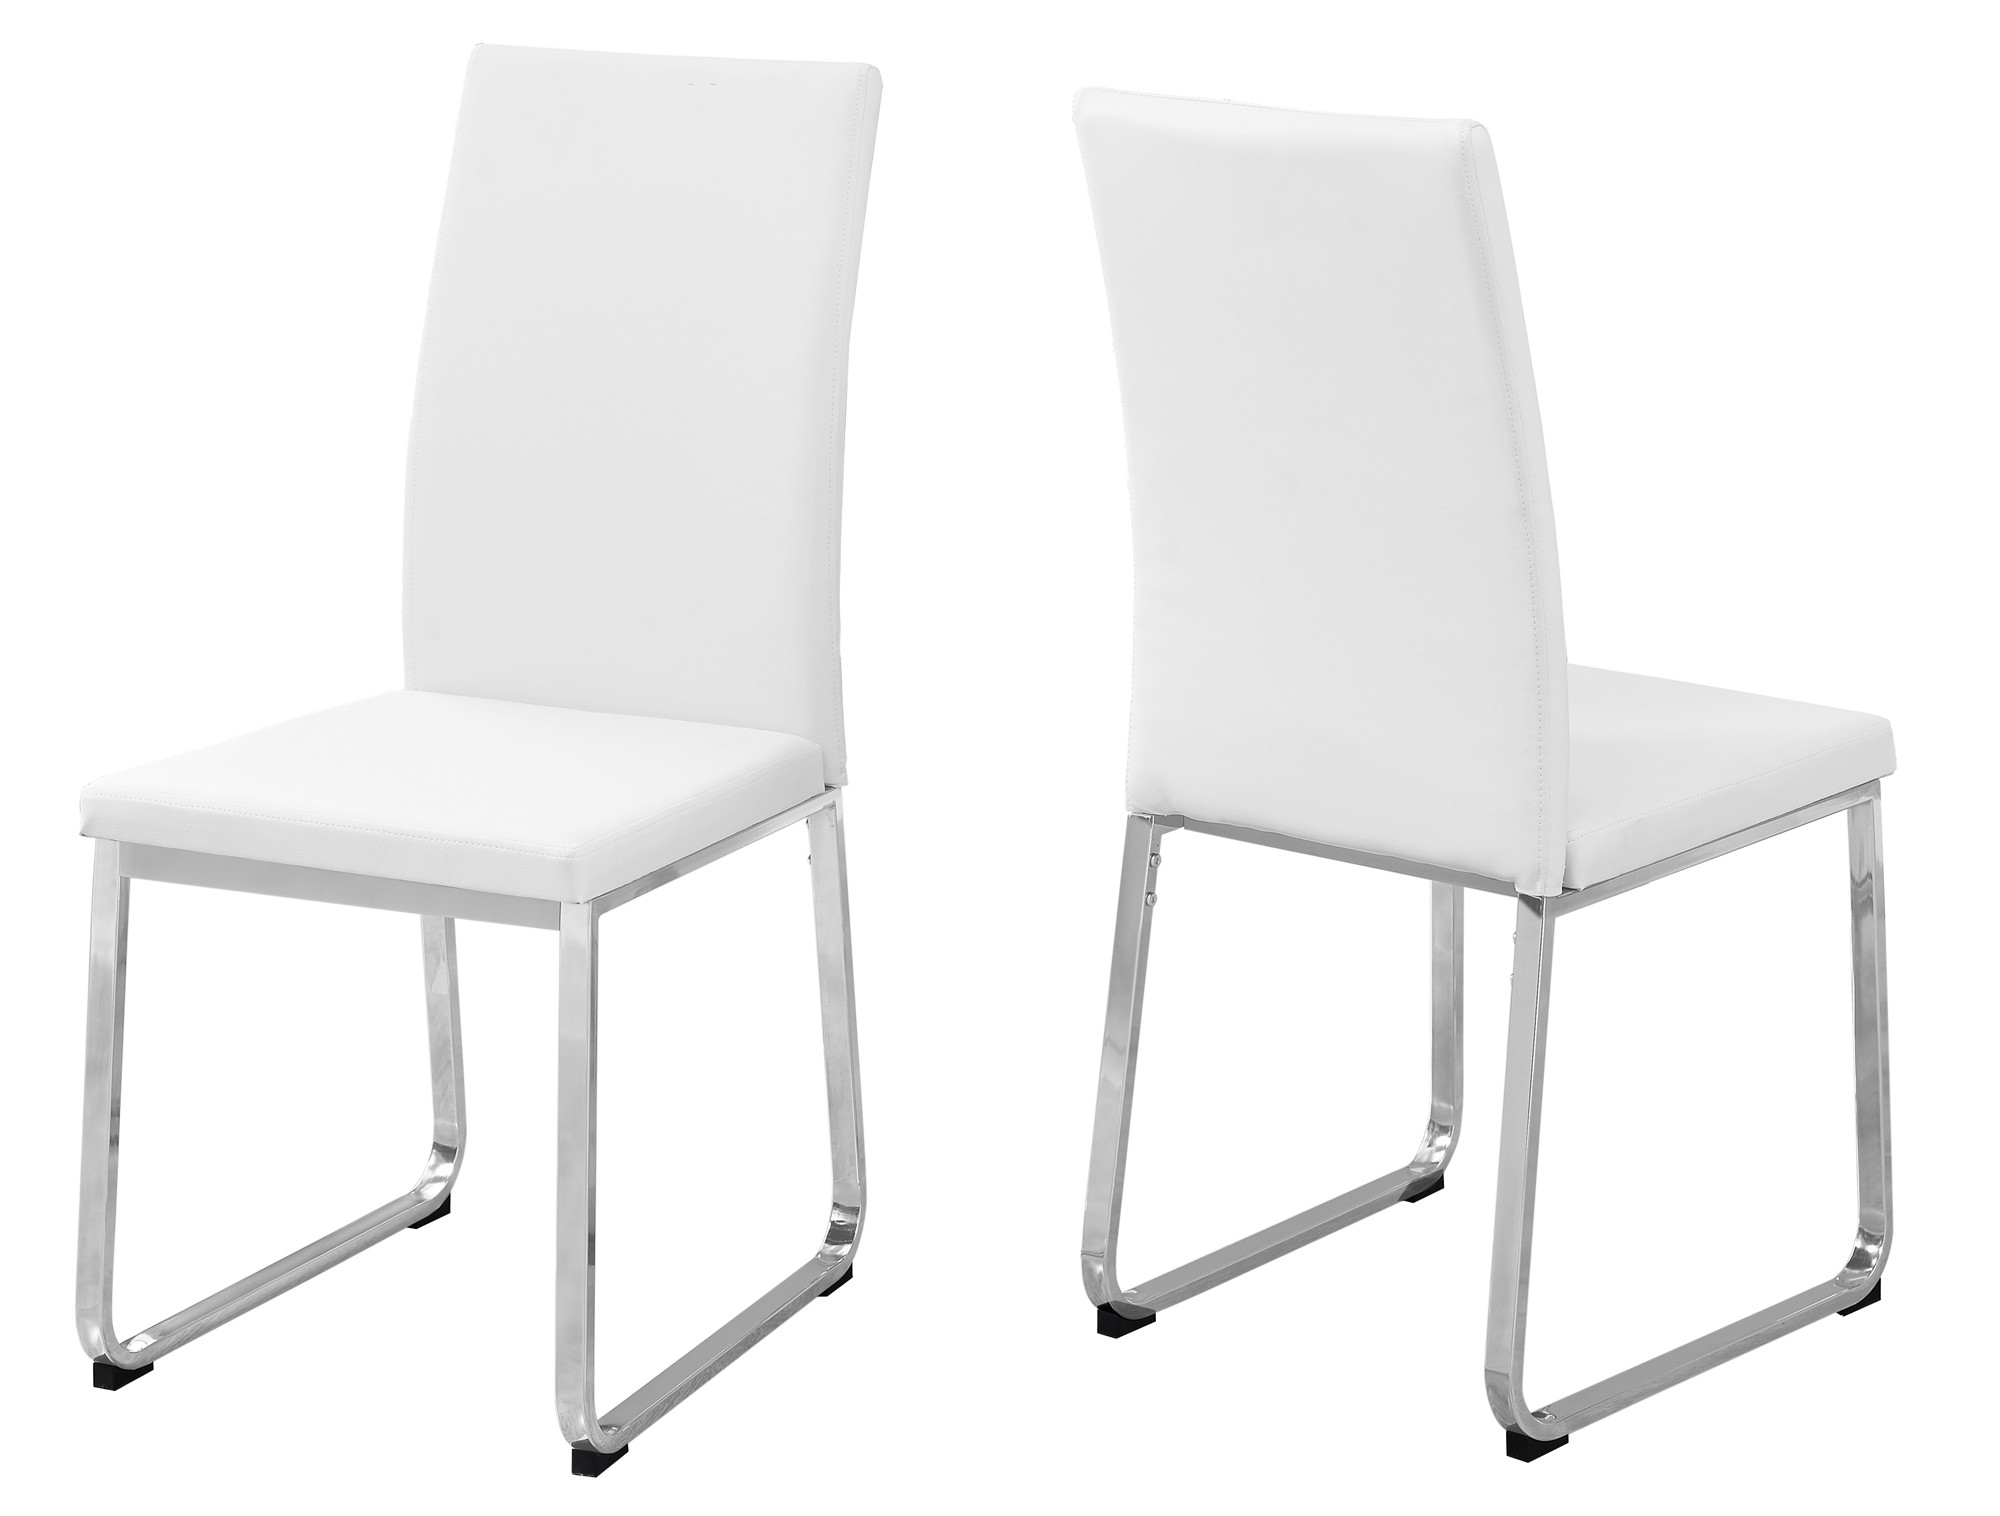 DINING CHAIR - 2PCS / 38"H / WHITE LEATHER-LOOK / CHROME